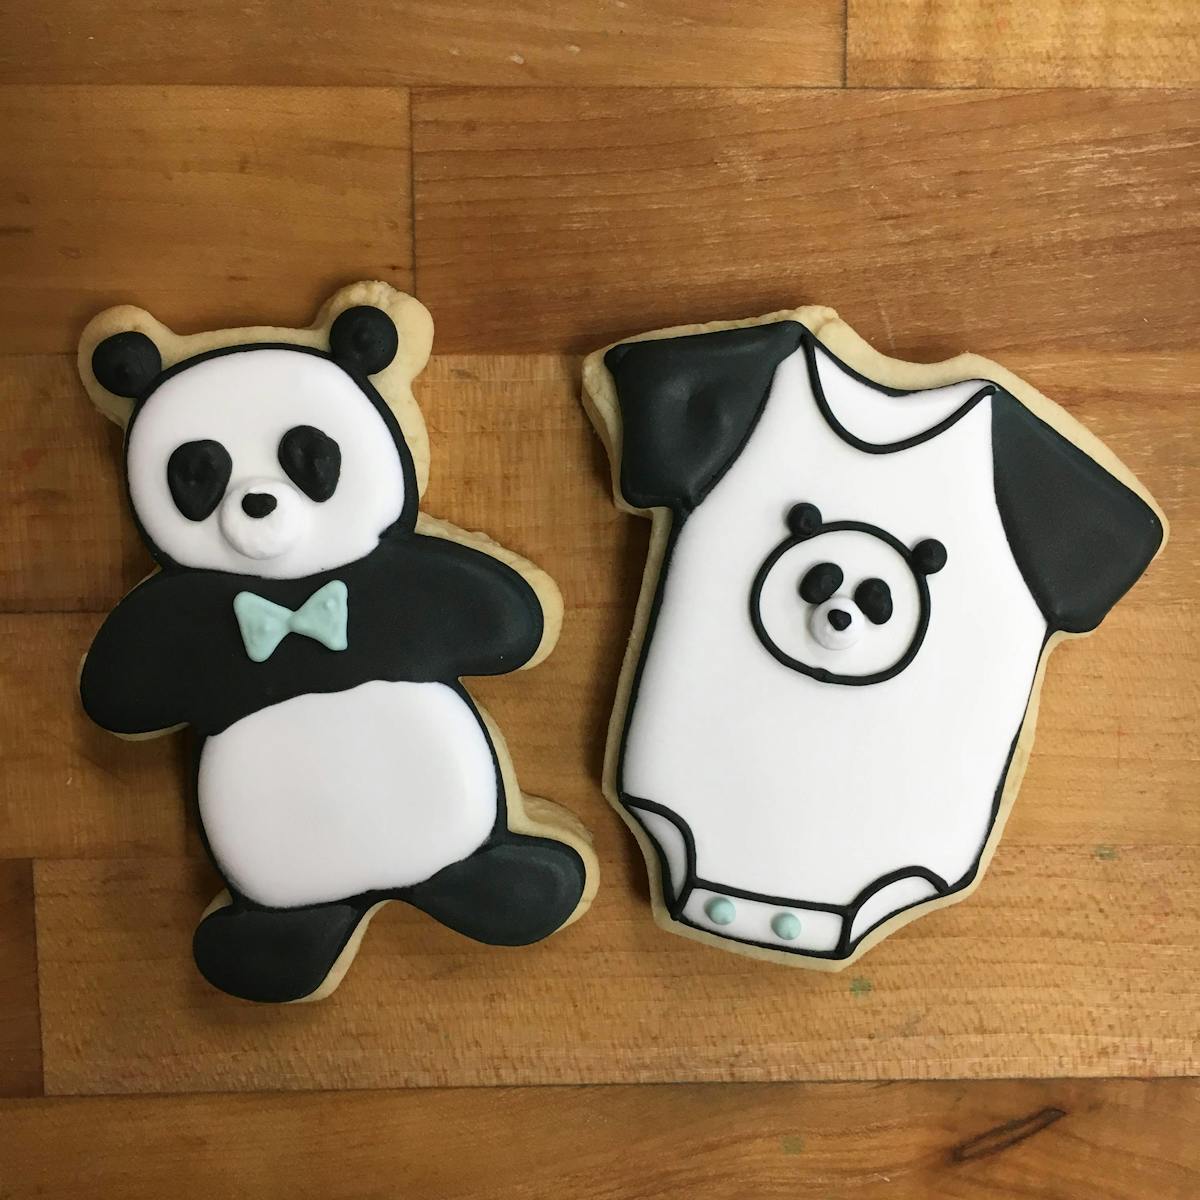 cookies shaped in the form of a panda